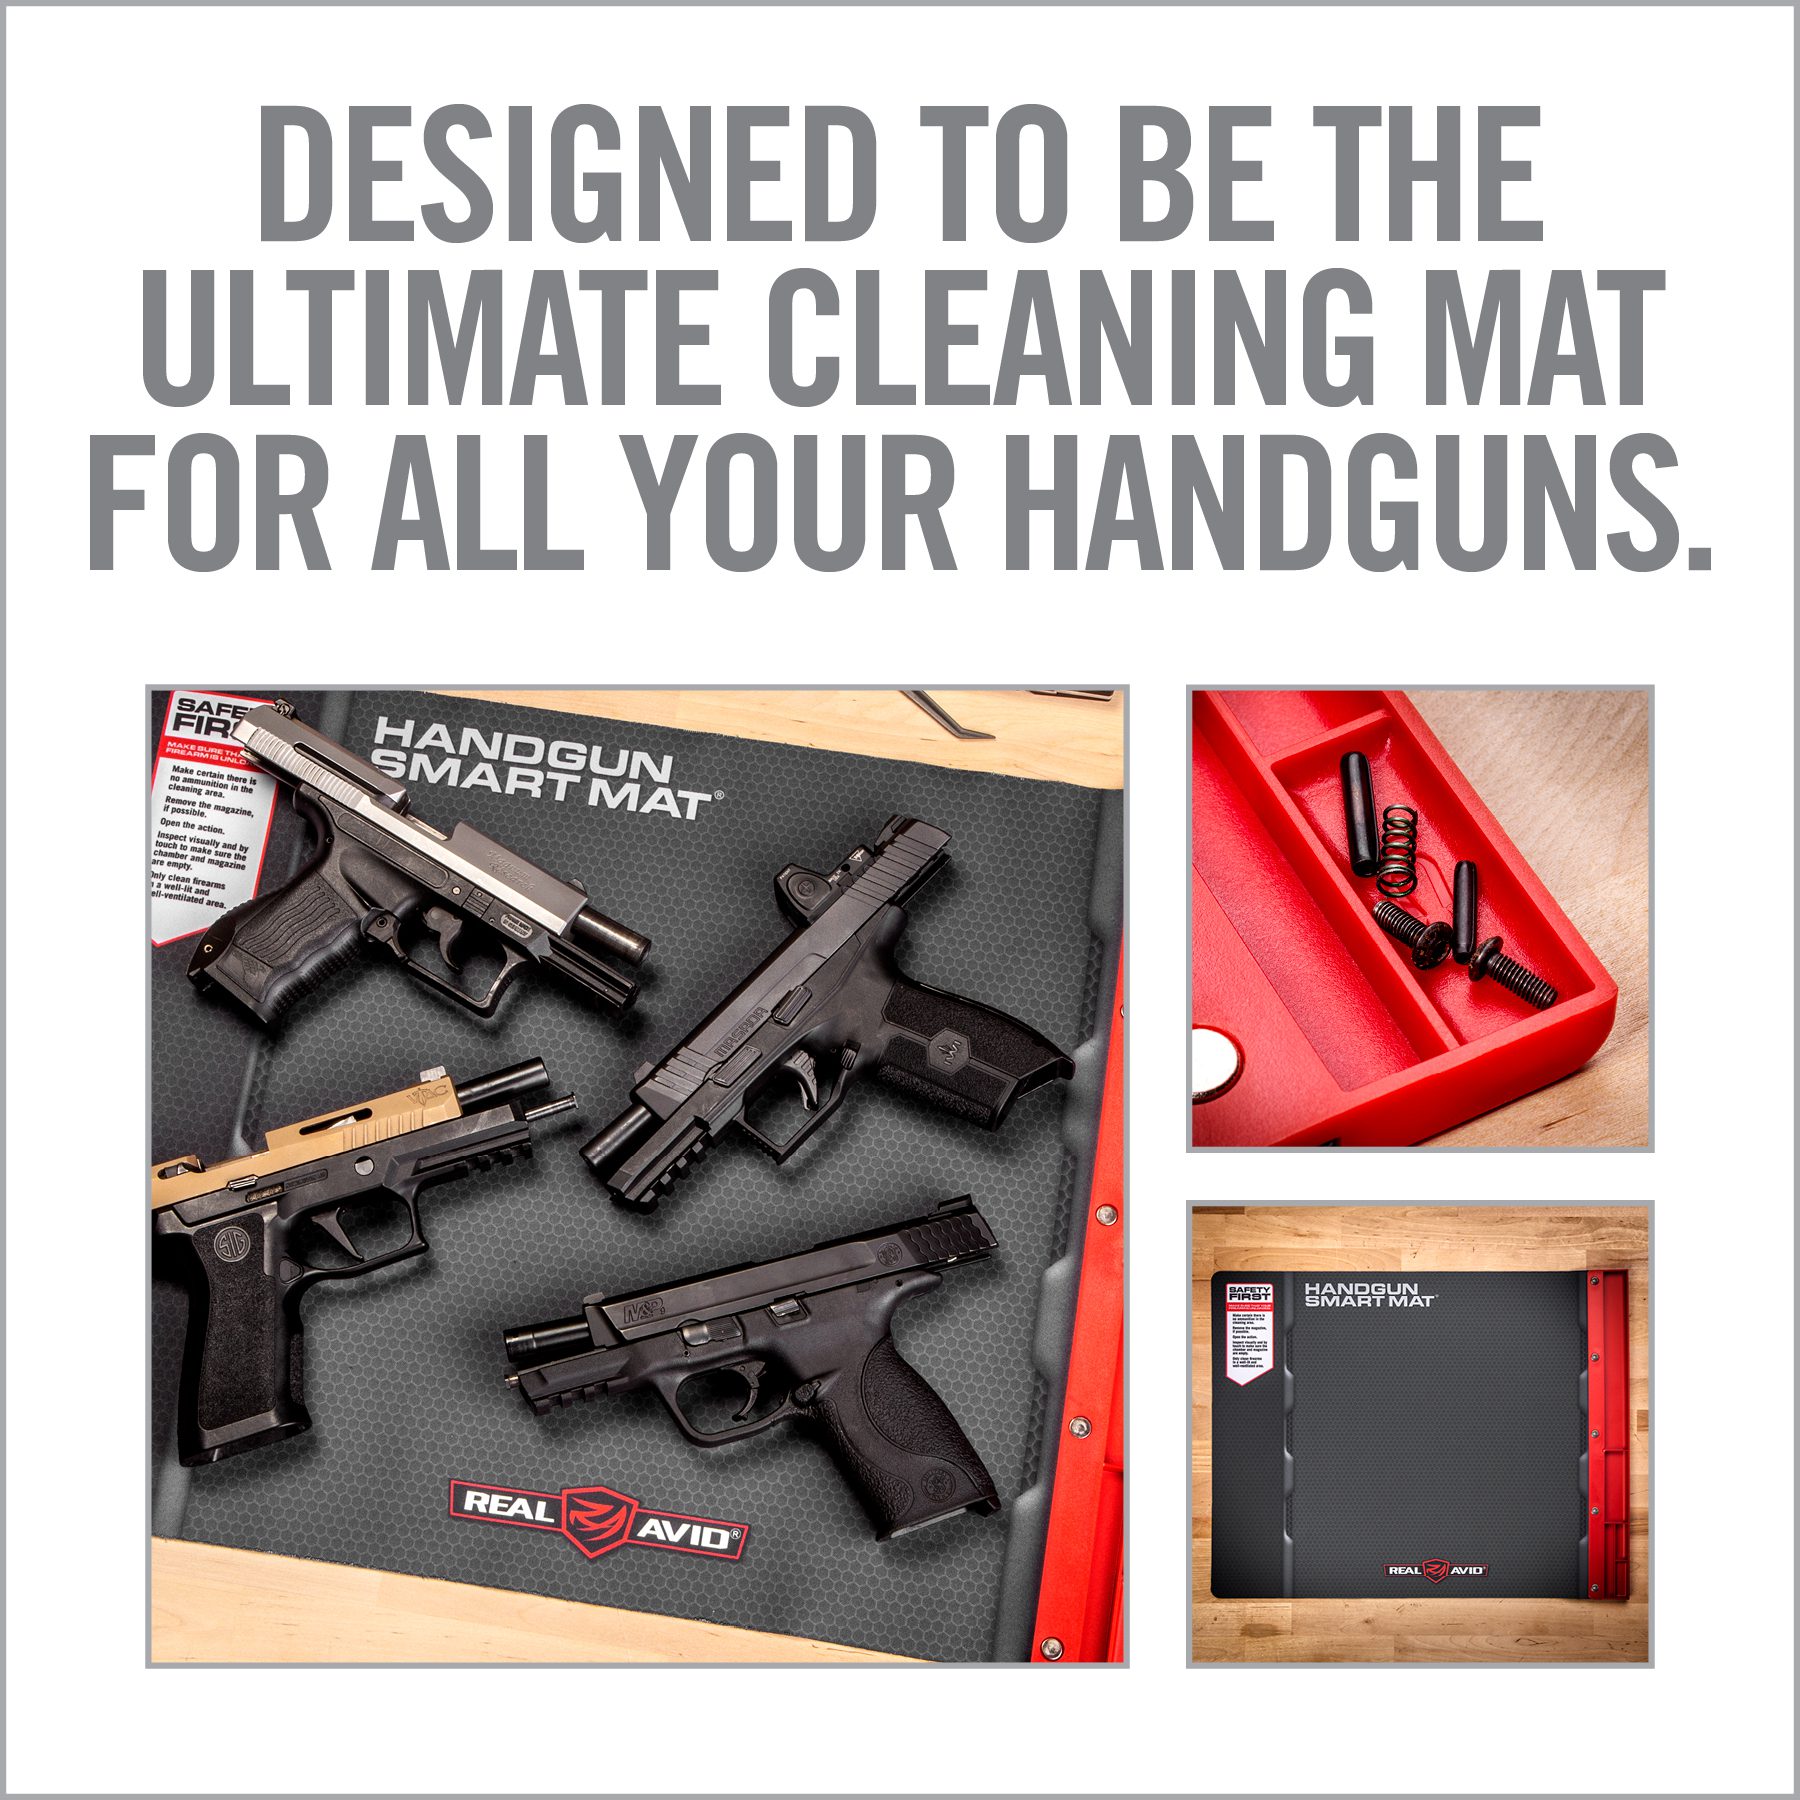 the ultimate cleaning mat for all your handguns